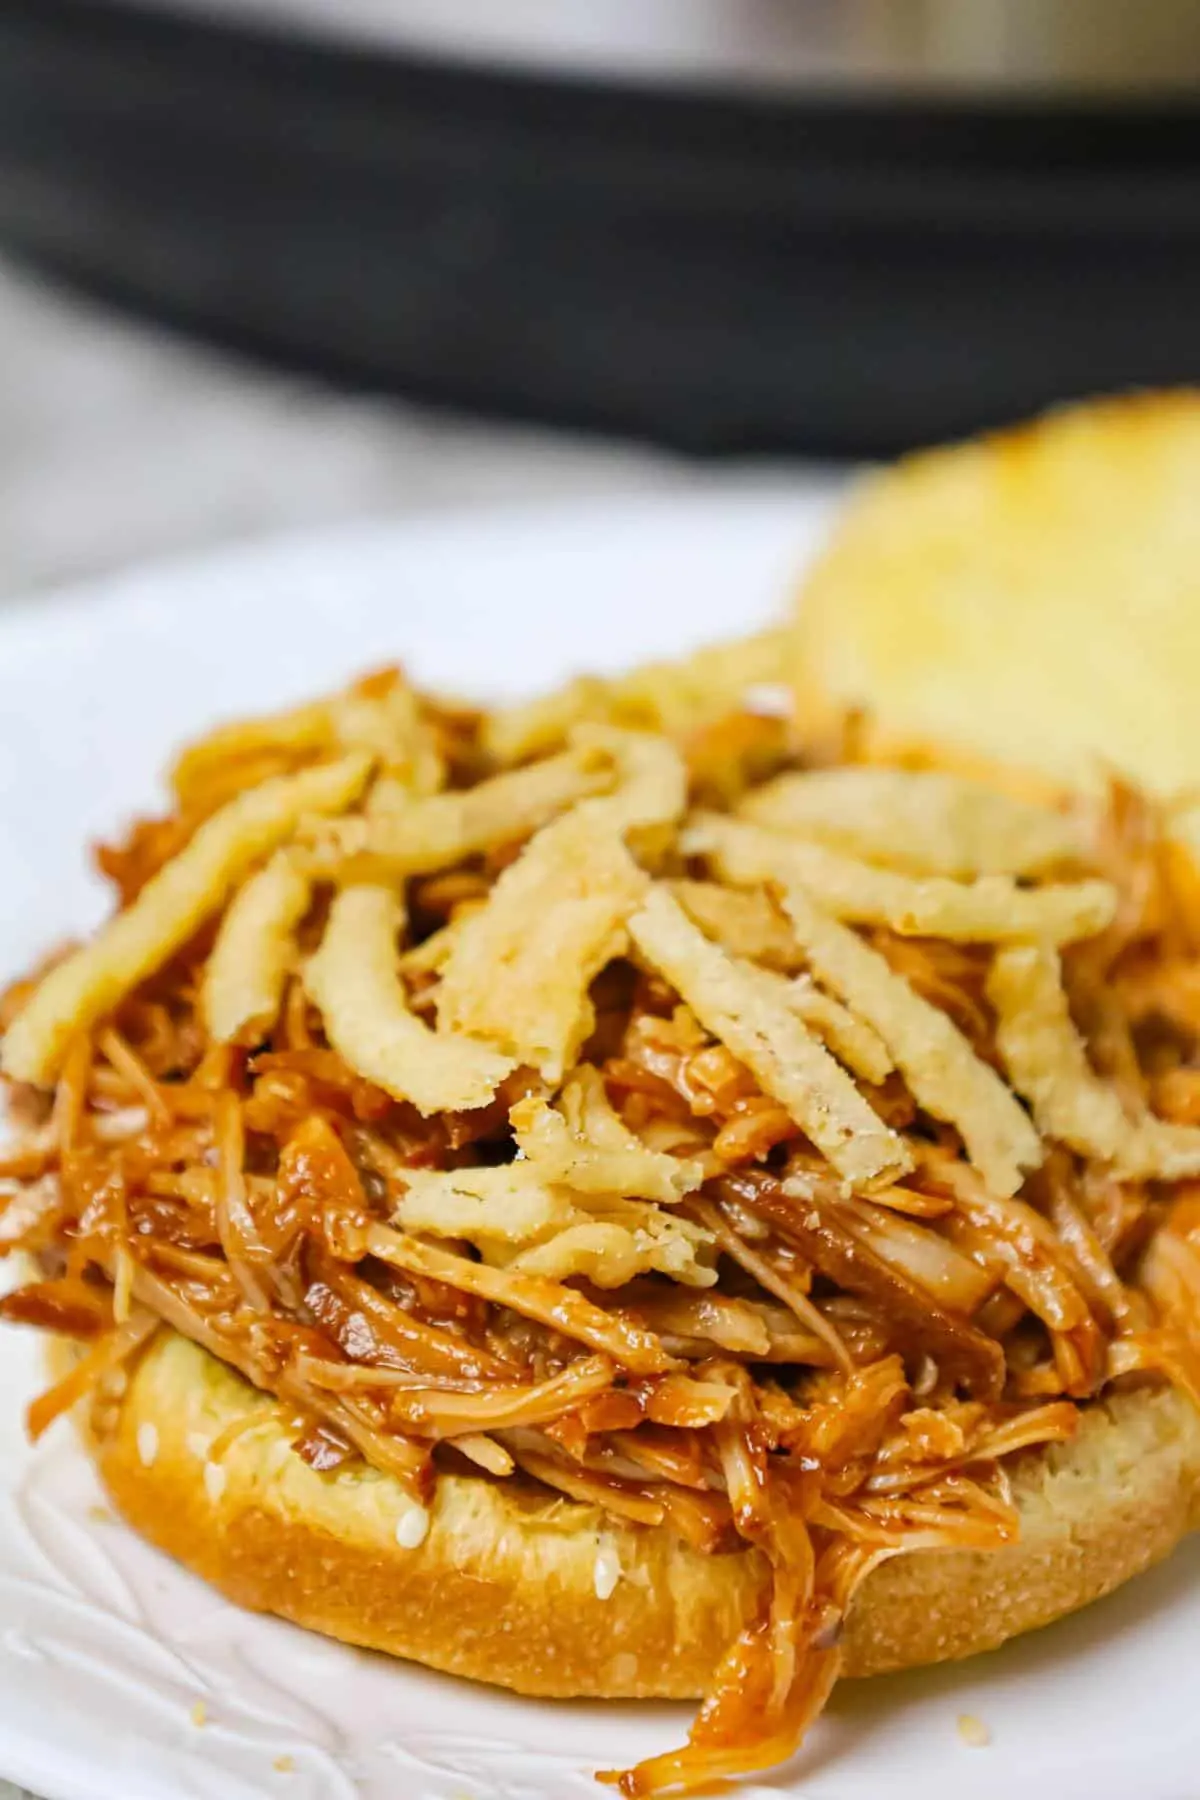 Instant Pot Pulled Pork is an easy and delicious dinner made with a boneless pork roast pressure cooked in apple juice and BBQ sauce.